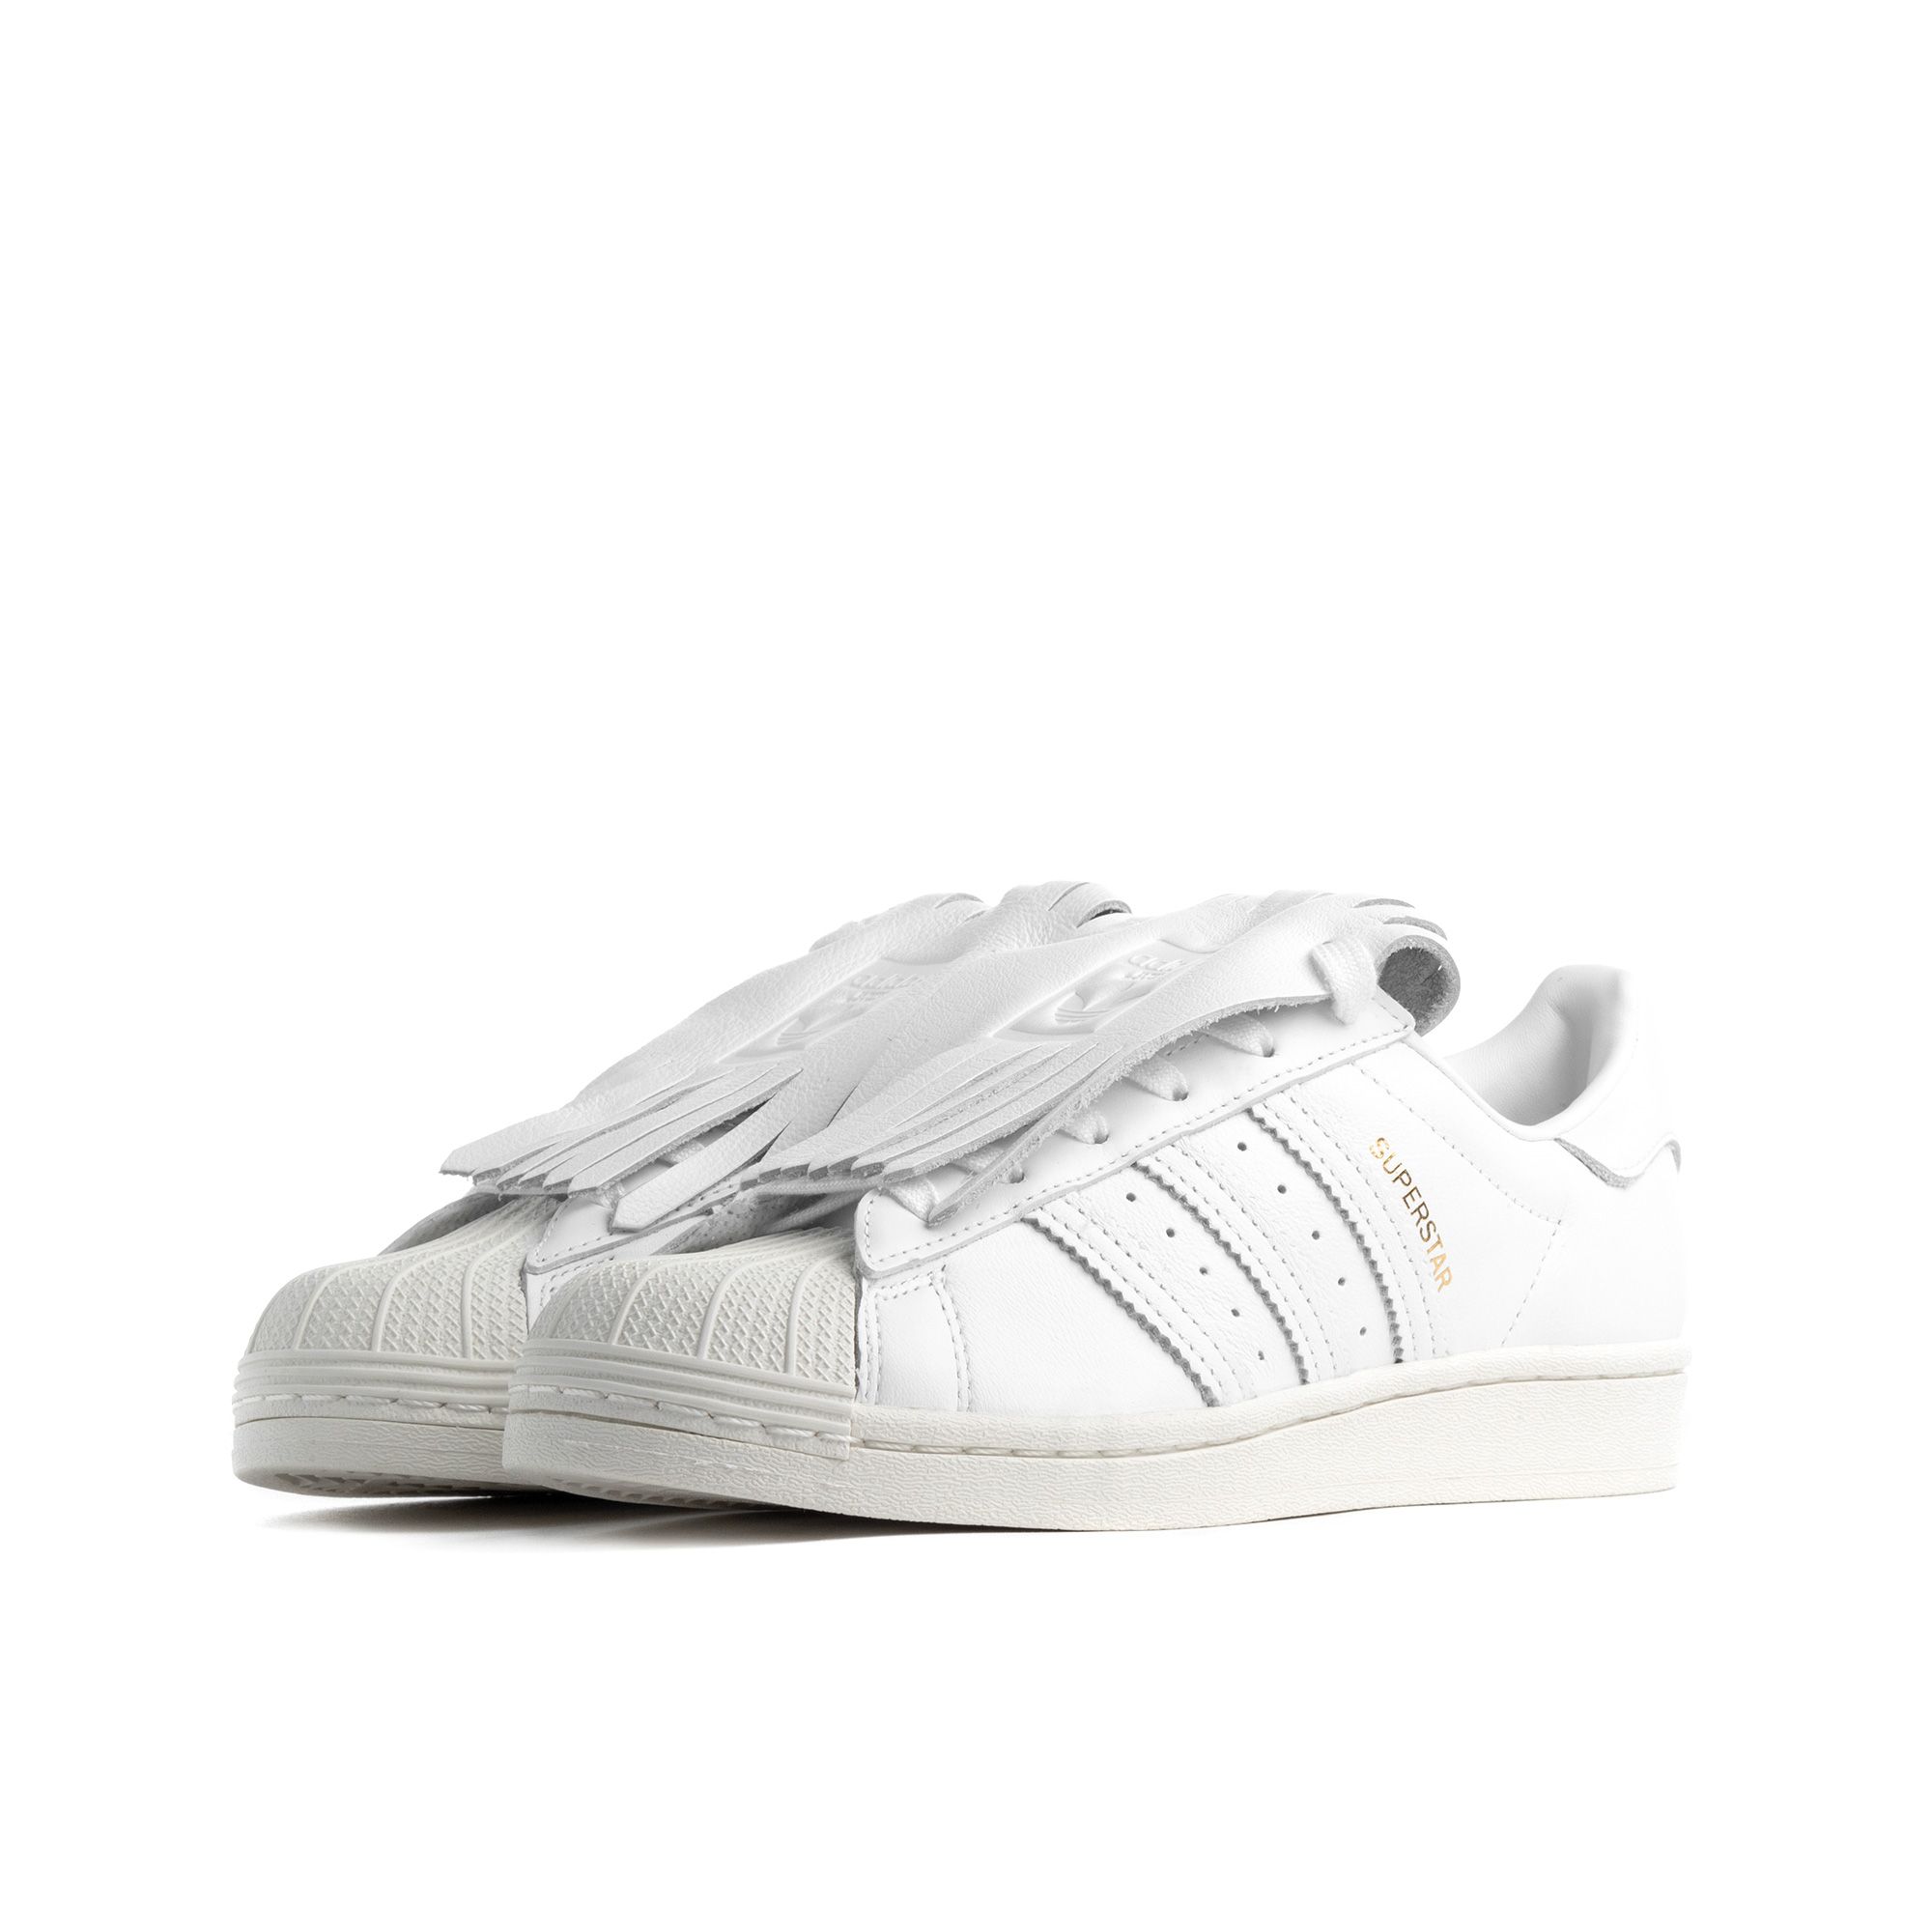 toxicity Shelling steel Adidas WMNS SUPERSTAR FRINGE white female Lowtop now available at BSTN in  size 38 on BSTN - US | AccuWeather Shop